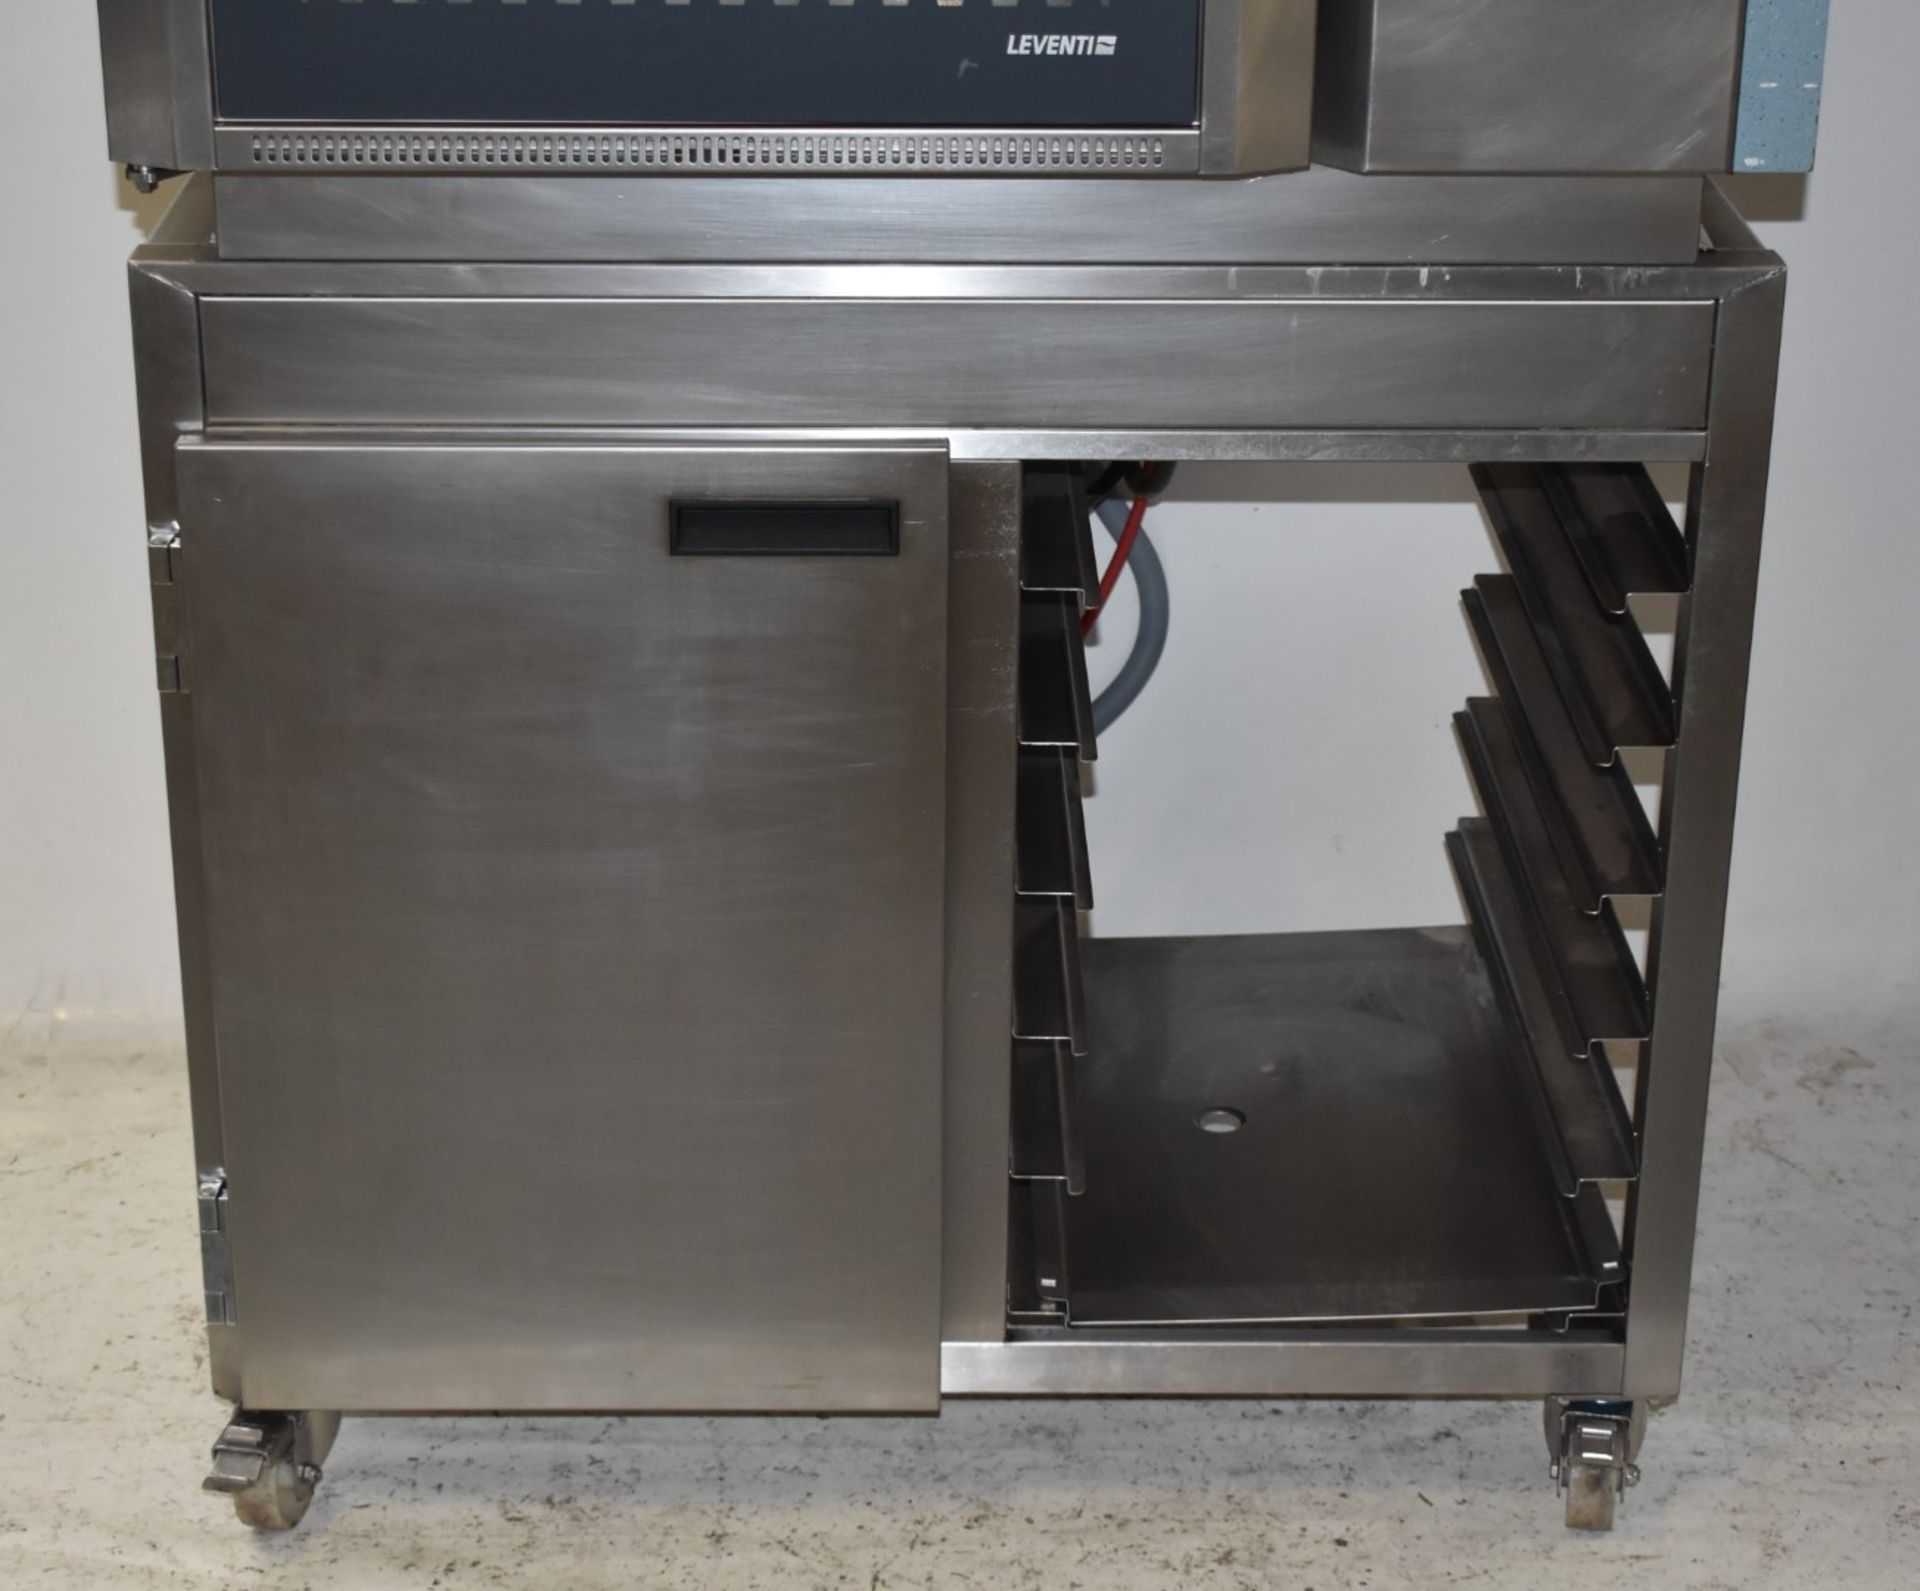 1 x Leventi Combimat Mastermind Steamer Oven - 6 Grid - 3 Phase - Includes Mobile Pedestal Base With - Image 14 of 14